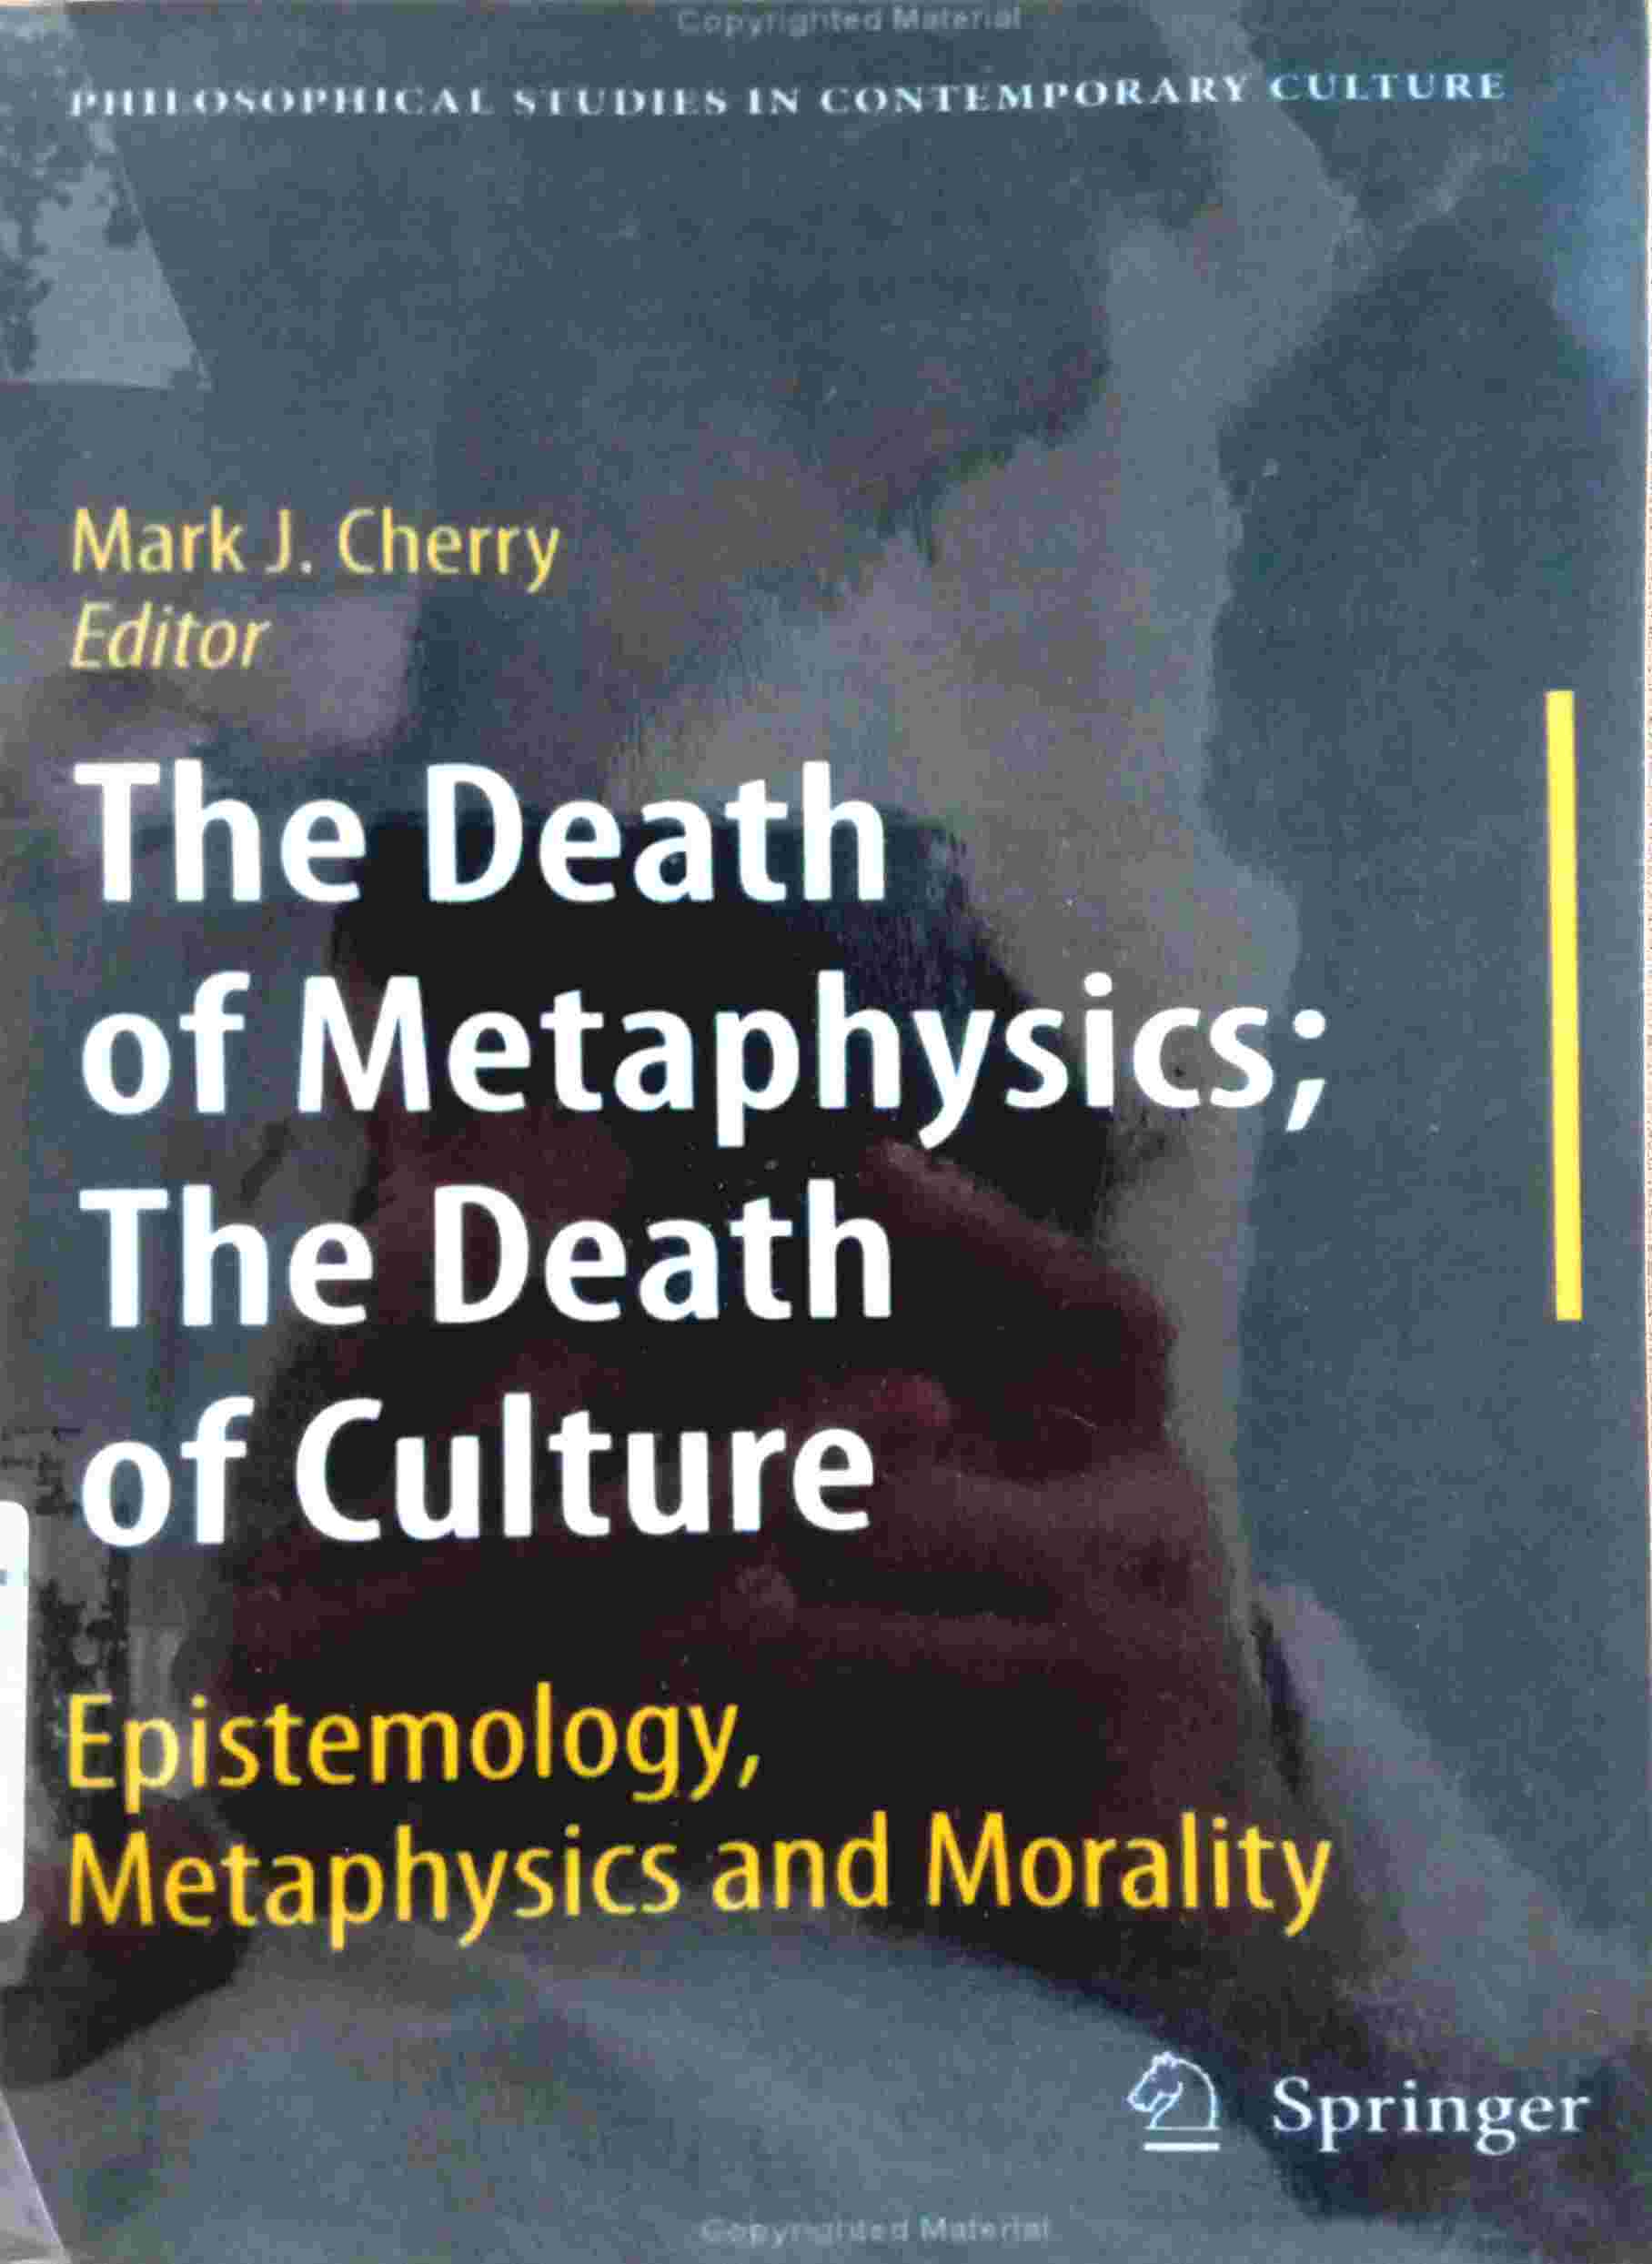 THE DEATH OF METAPHYSICS - THE DEATH OF CULTURE